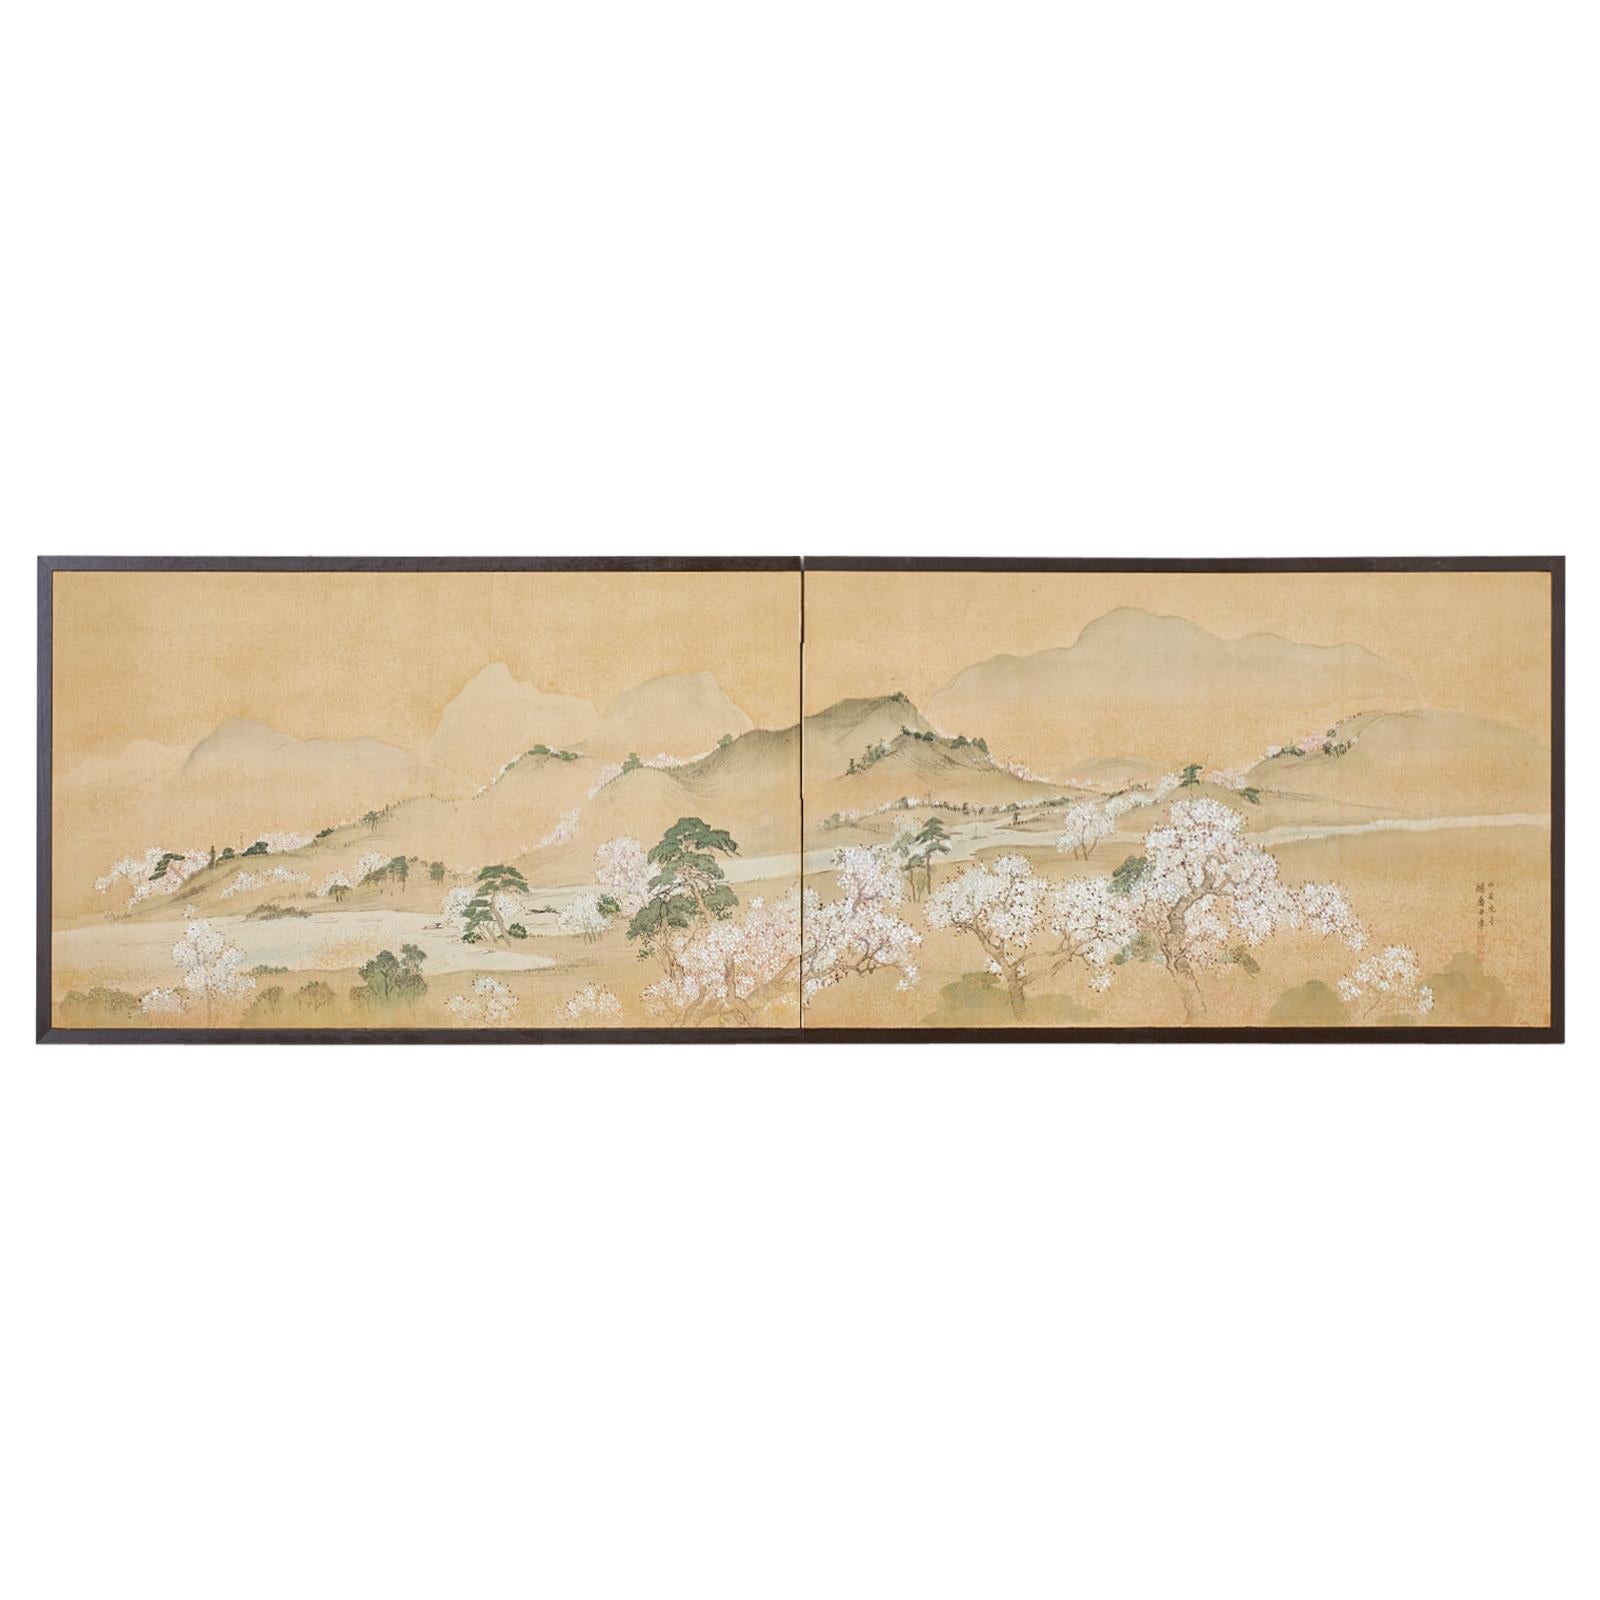 19th Century Japanese Two-Panel Screen Blossoming Cherry Trees